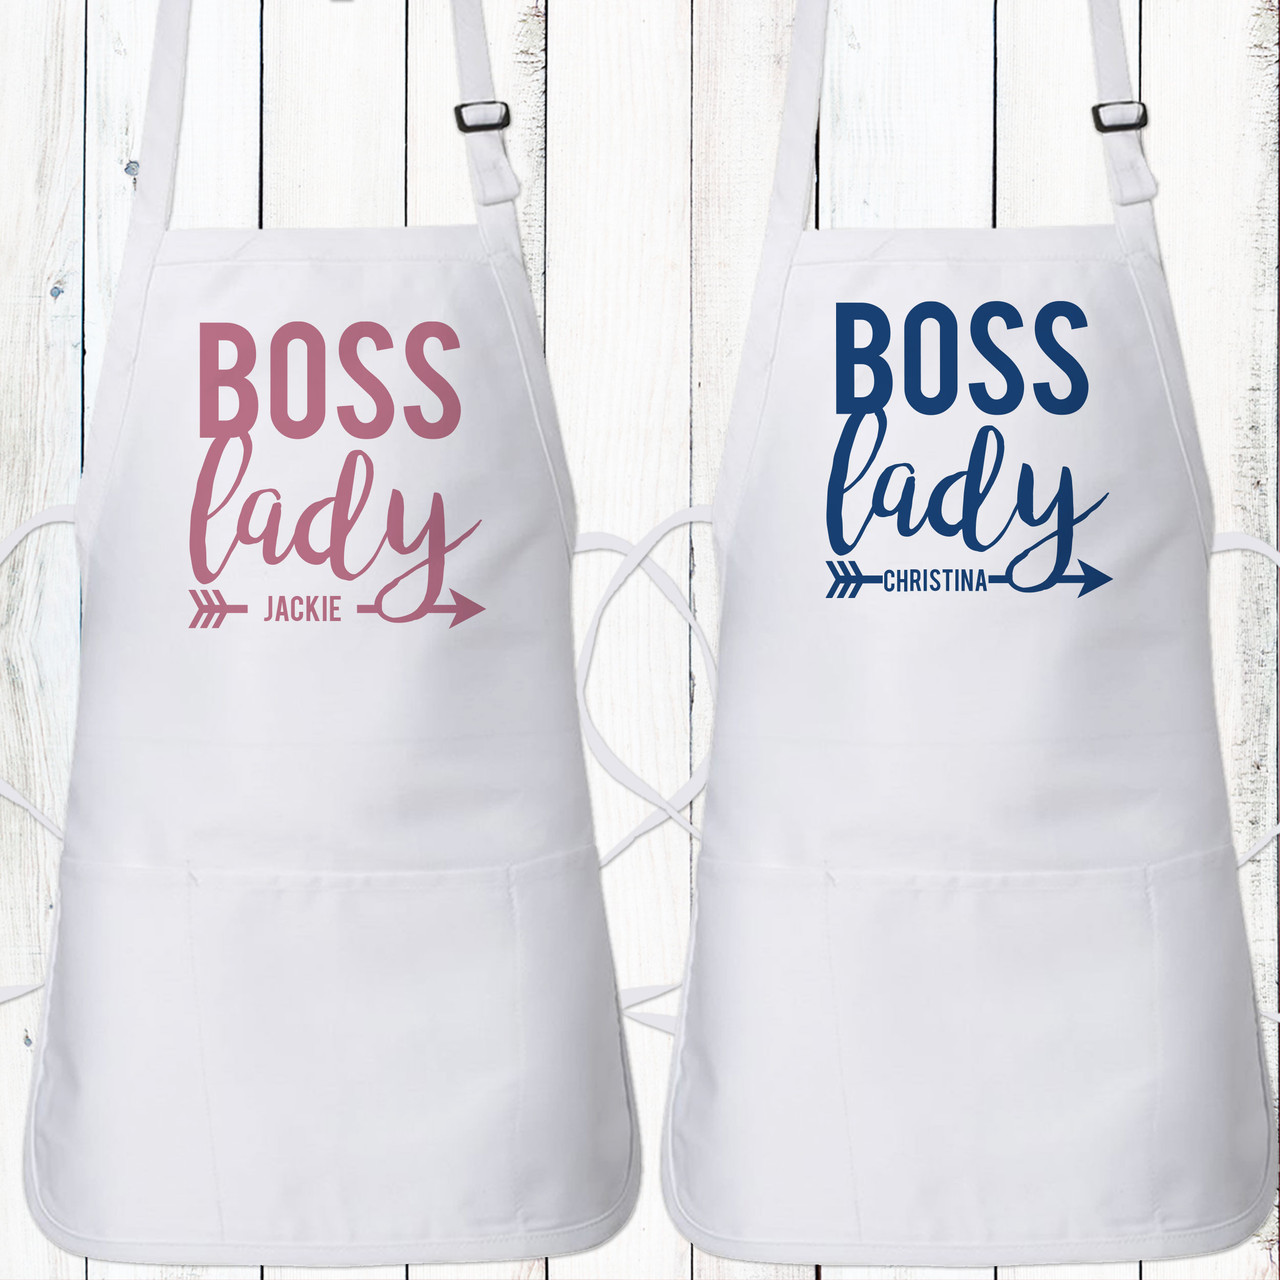 Apron - Wife Mom Boss, Kitchen Apron with Three-section Pocket, Mommy,  Mama, Cooking Gift for Mothers Day, Mom Life